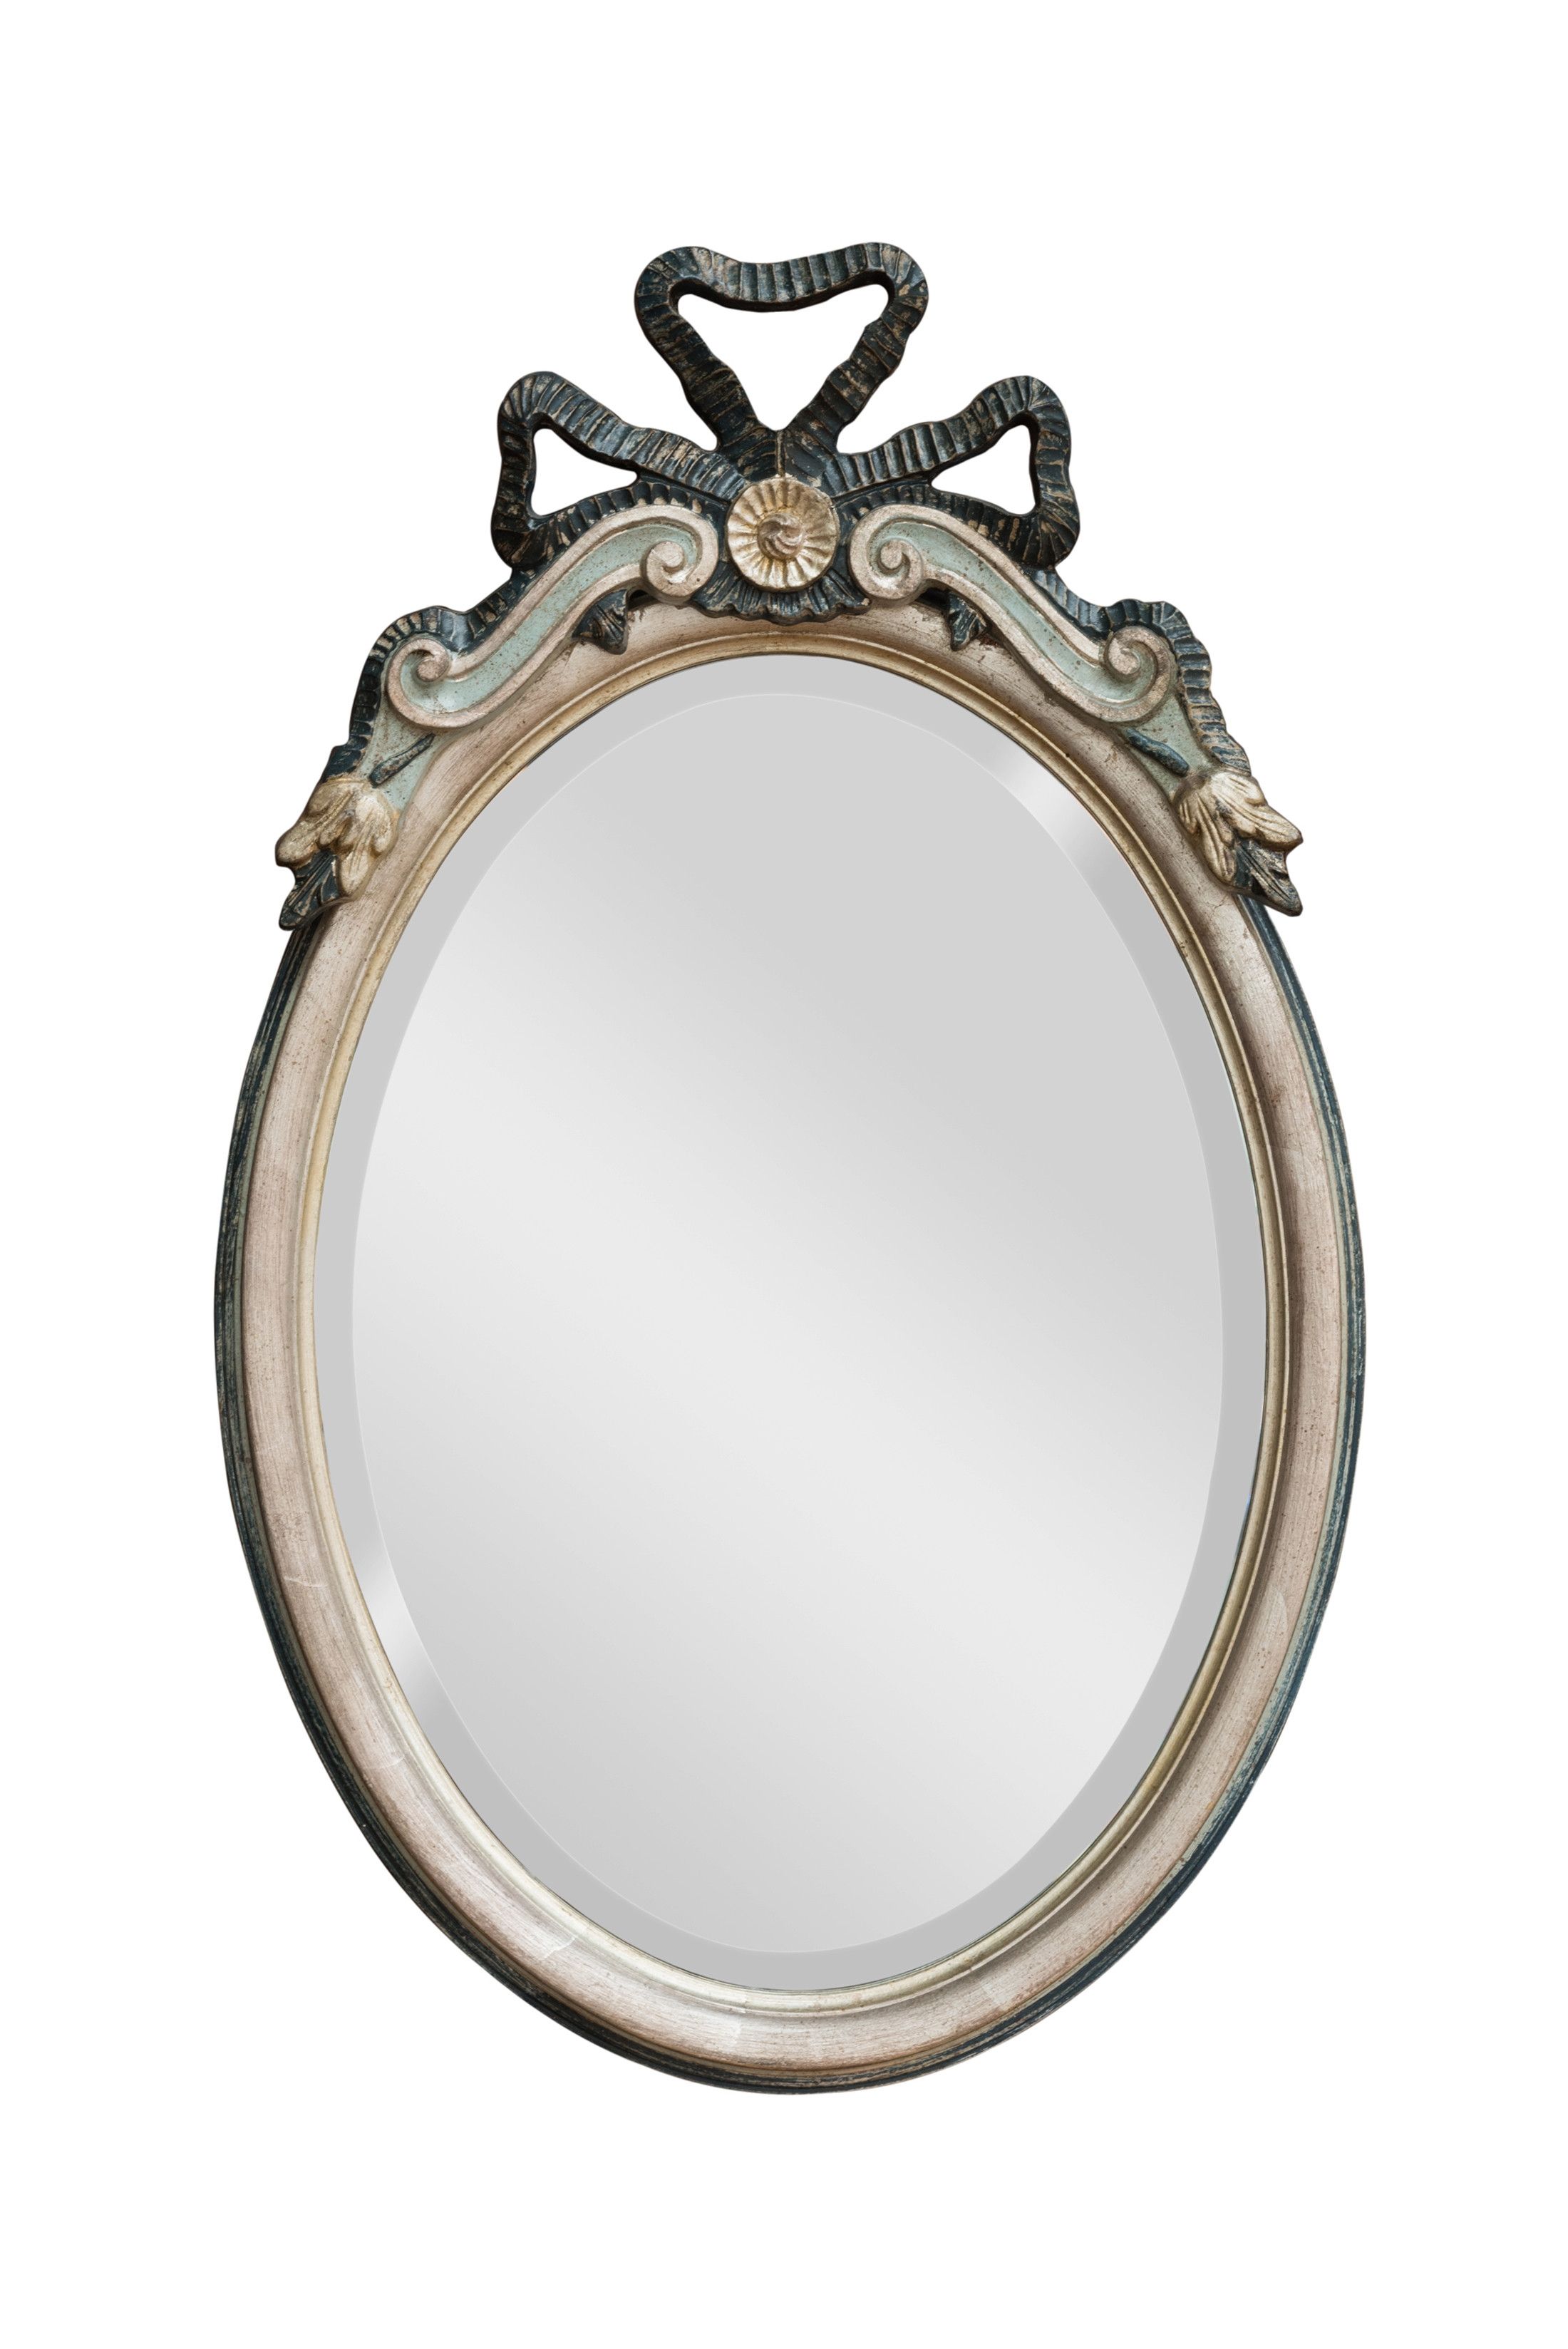 Bow Top Oval Mirror Hall Mirrors For Sale Panfili Mirrors Intended For Silver Oval Mirror (View 12 of 15)